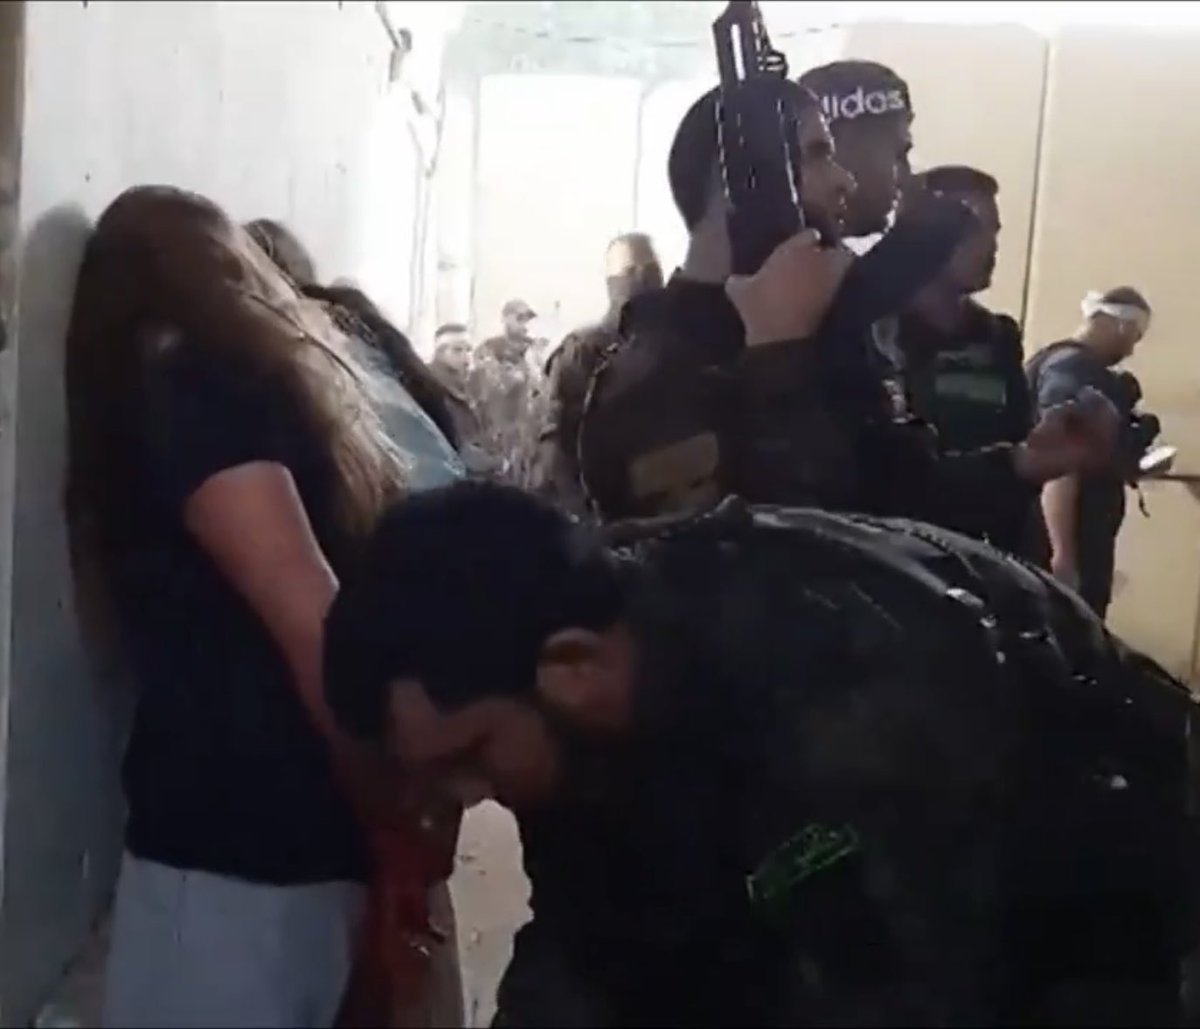 Newly released footage shows Hamas terrorists kidnapping and abusing young Israeli women on October 7th. Hamas has held them hostage in Gaza for 229 days. #BringThemHome